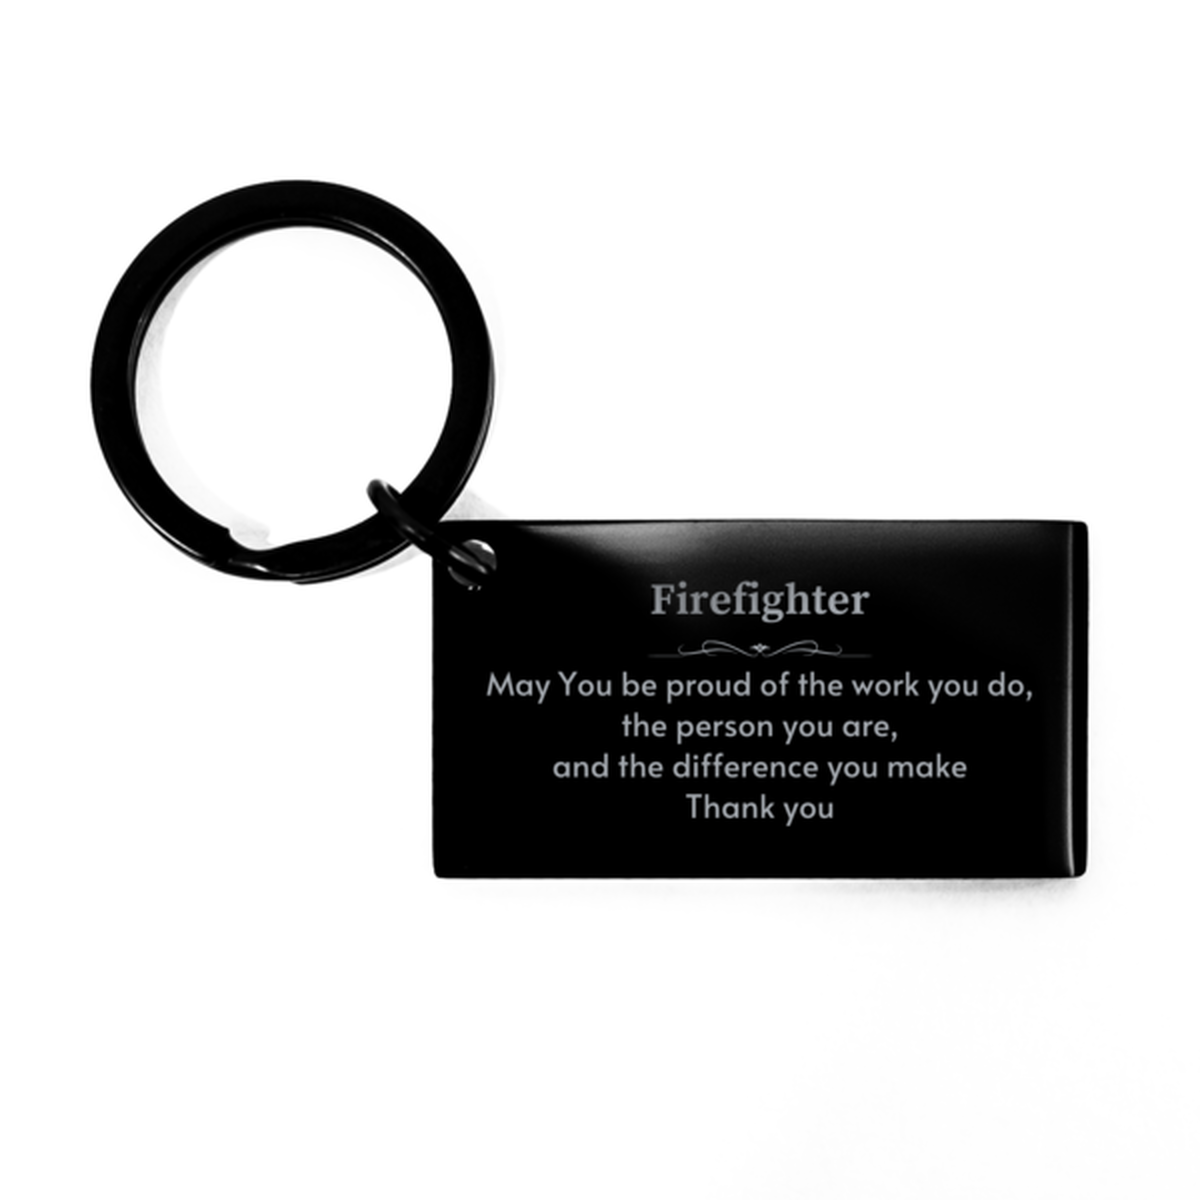 Heartwarming Keychain Retirement Coworkers Gifts for Firefighter, Lawyer May You be proud of the work you do, the person you are Gifts for Boss Men Women Friends